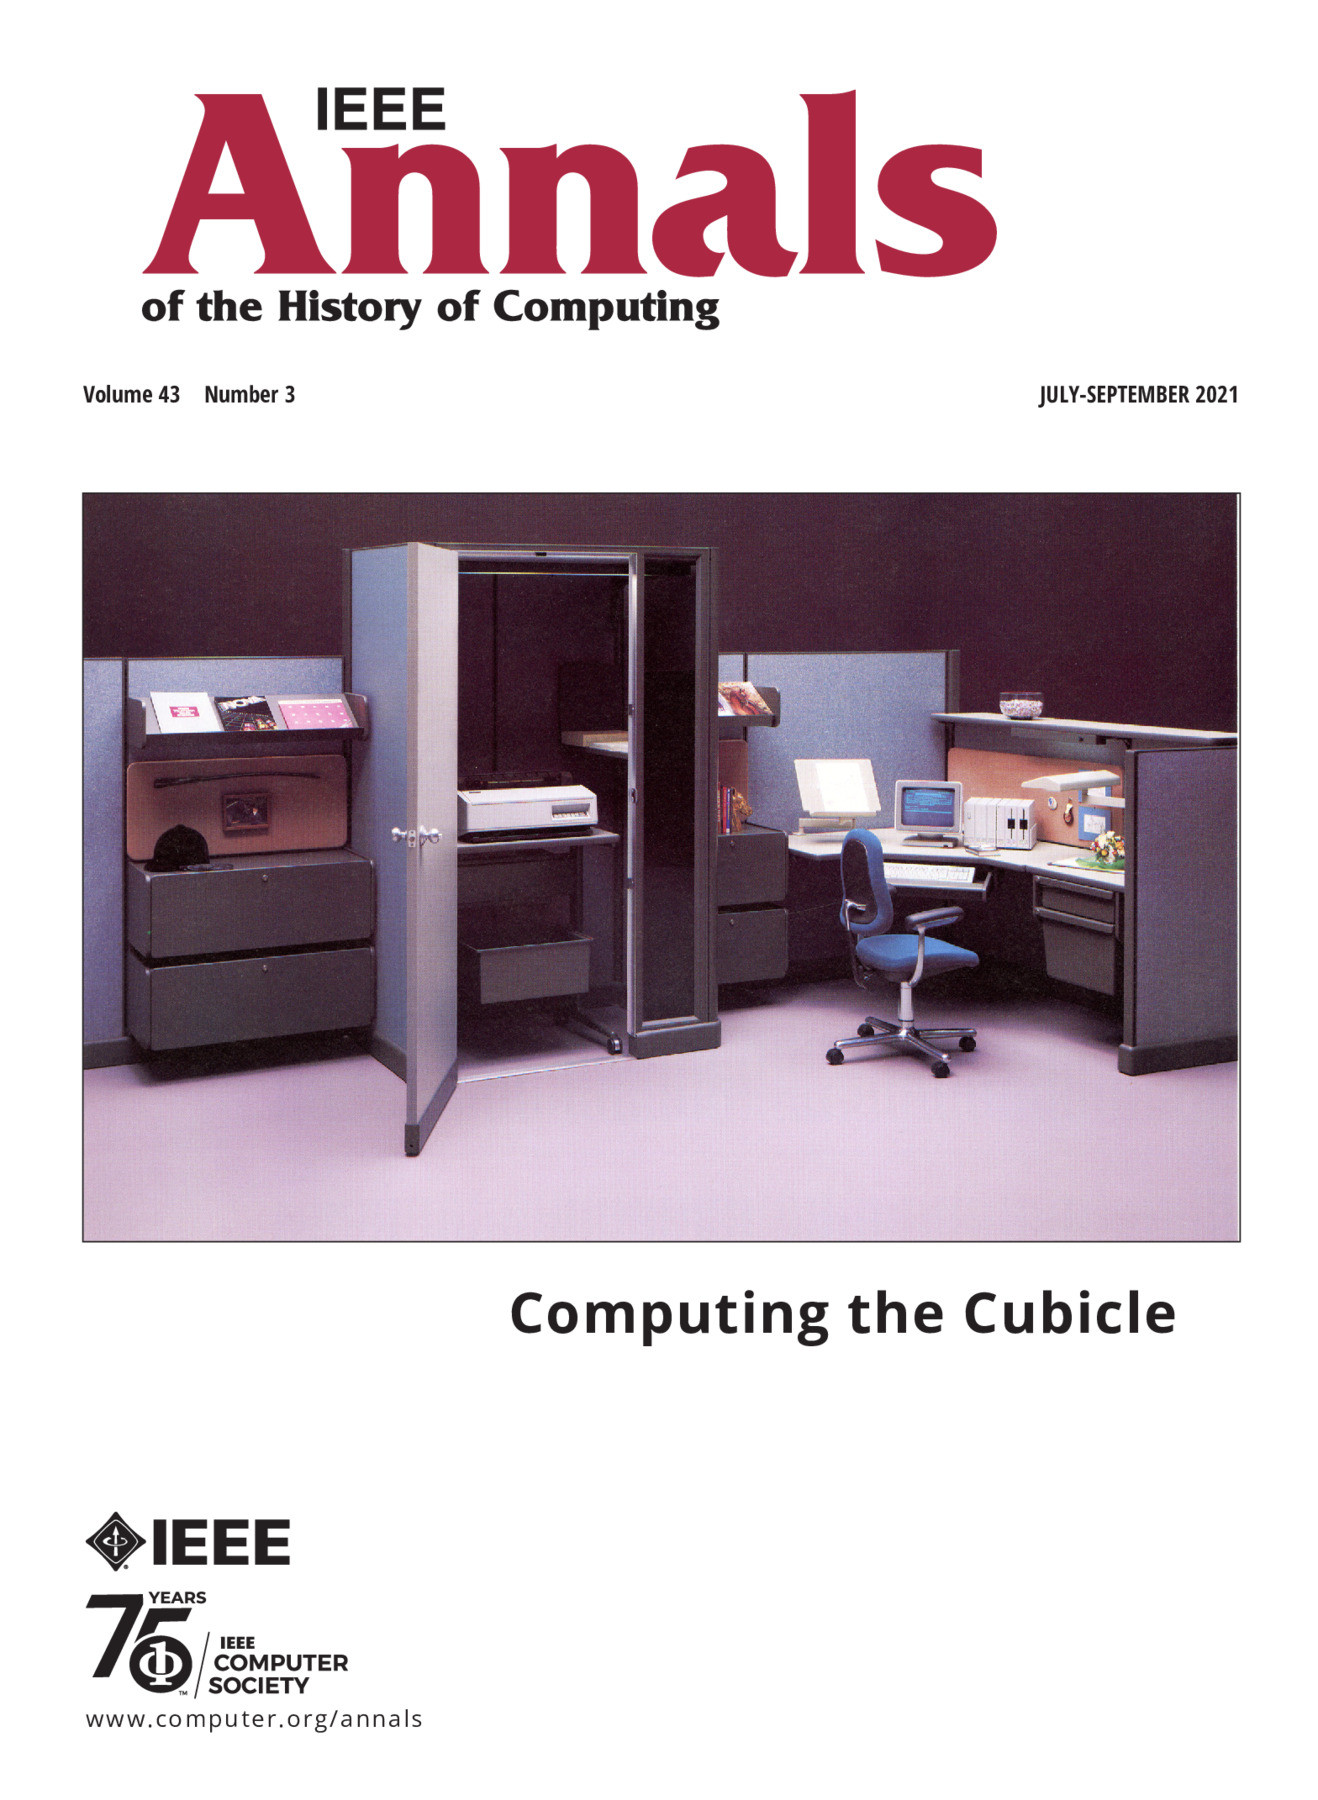 IEEE Annals of the History of Computing July/August/September 2021 Vol. 43 No. 3